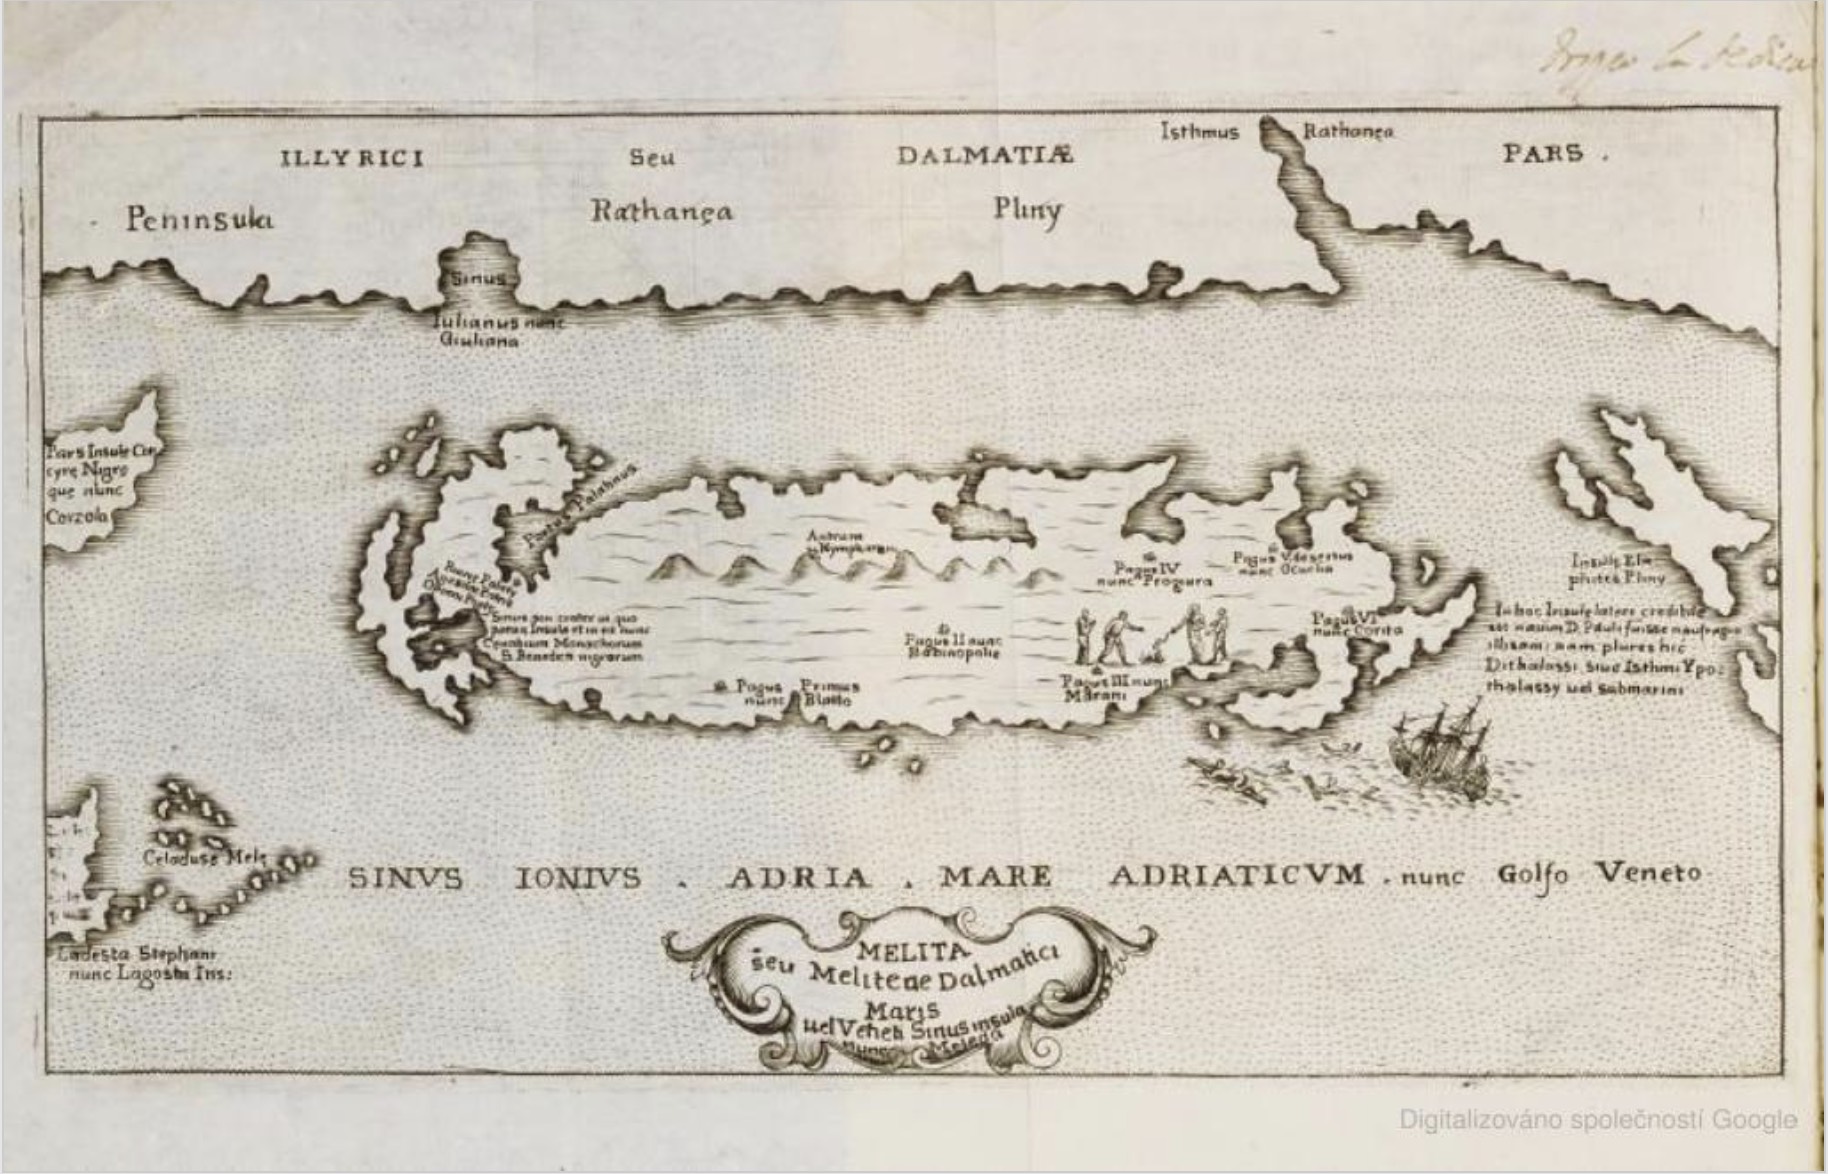 Map of Melite as the Site of Saint Paul’s Shipwreck